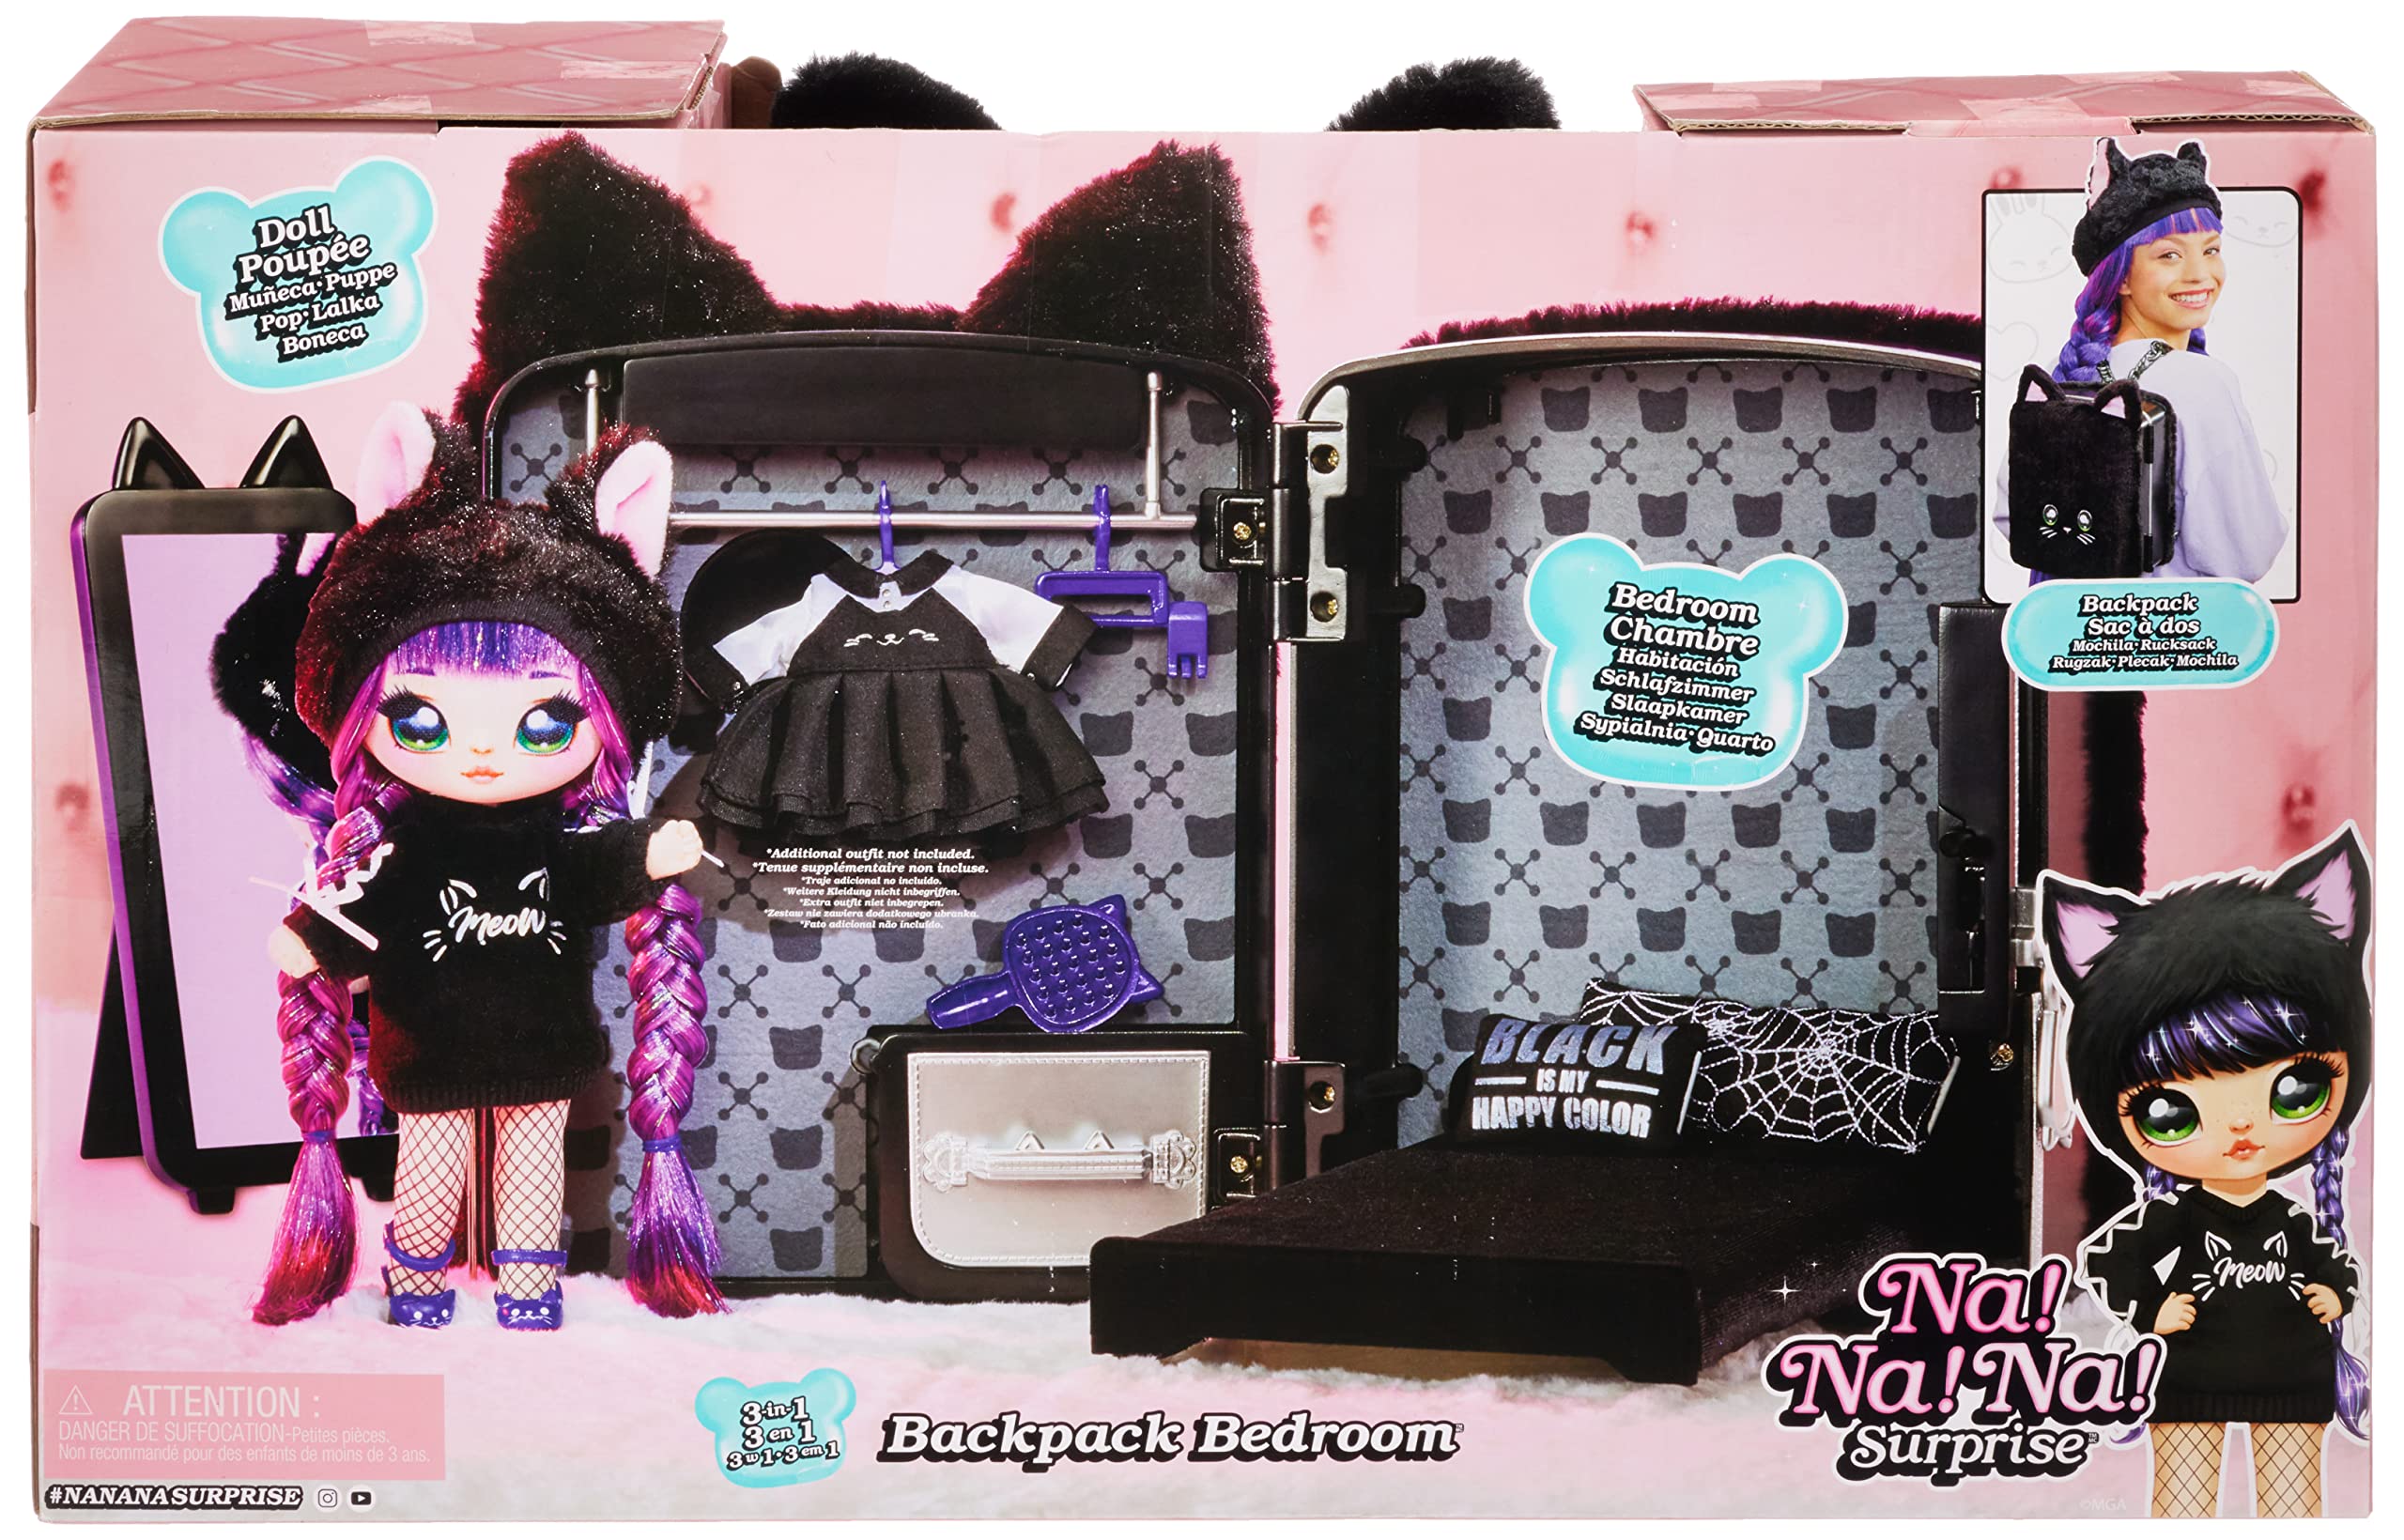 Na! Na! Na! Surprise 3-in-1 Backpack Bedroom Playset with Fashion Doll Tuesday Meow in Exclusive Outfit | Black Fuzzy Kitty Bag, Real Mirror, Closet with Drawer, Pillows, Blanket | Kids Ages 5+